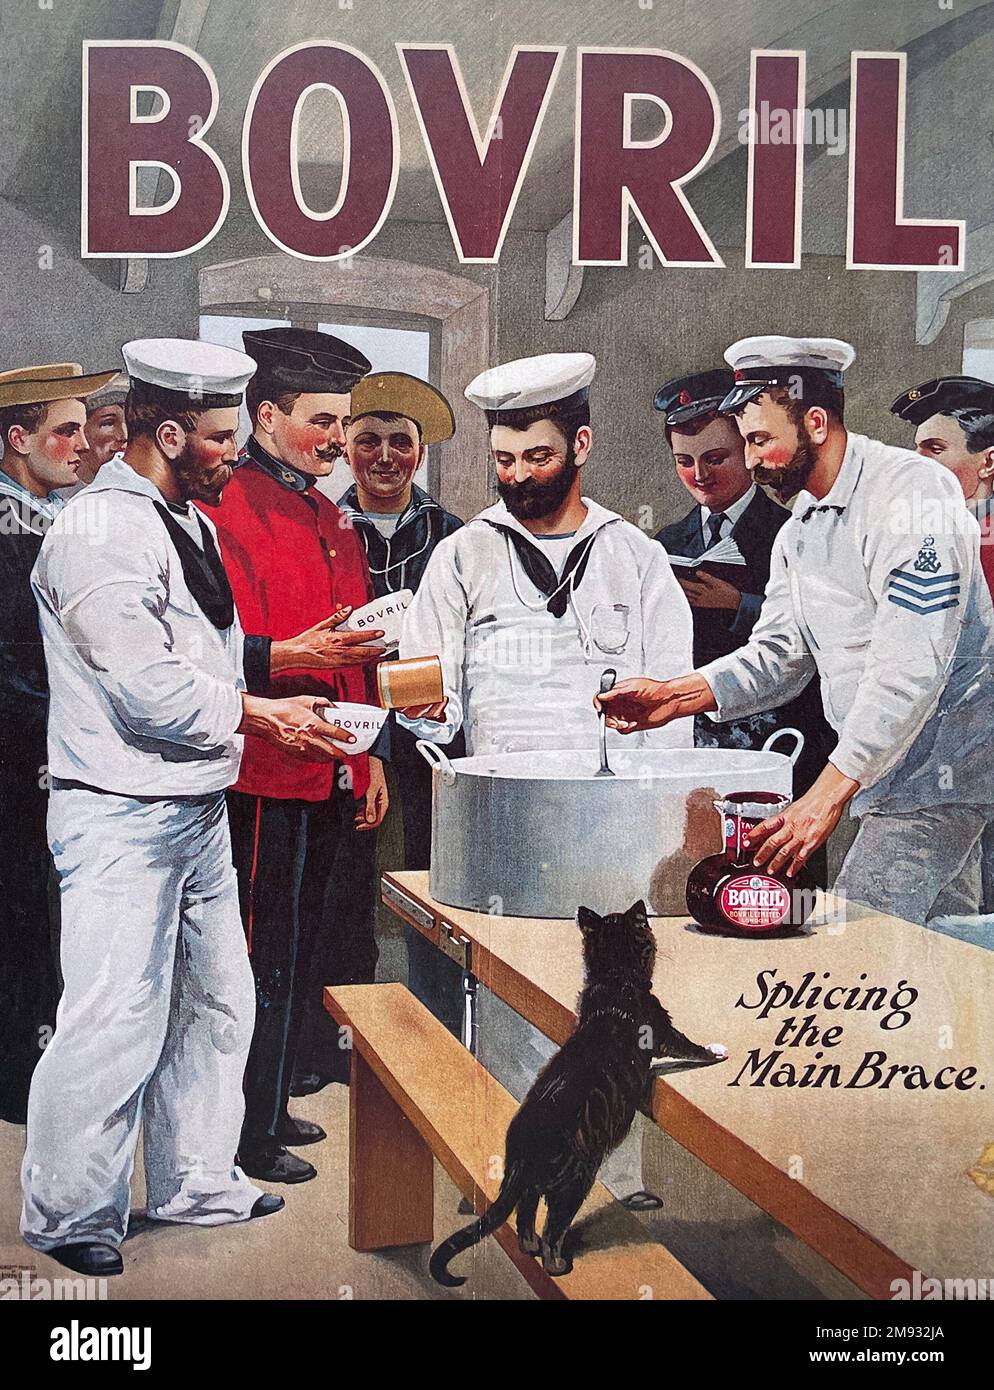 BOVRIL ADVERT about 1902 Stock Photo